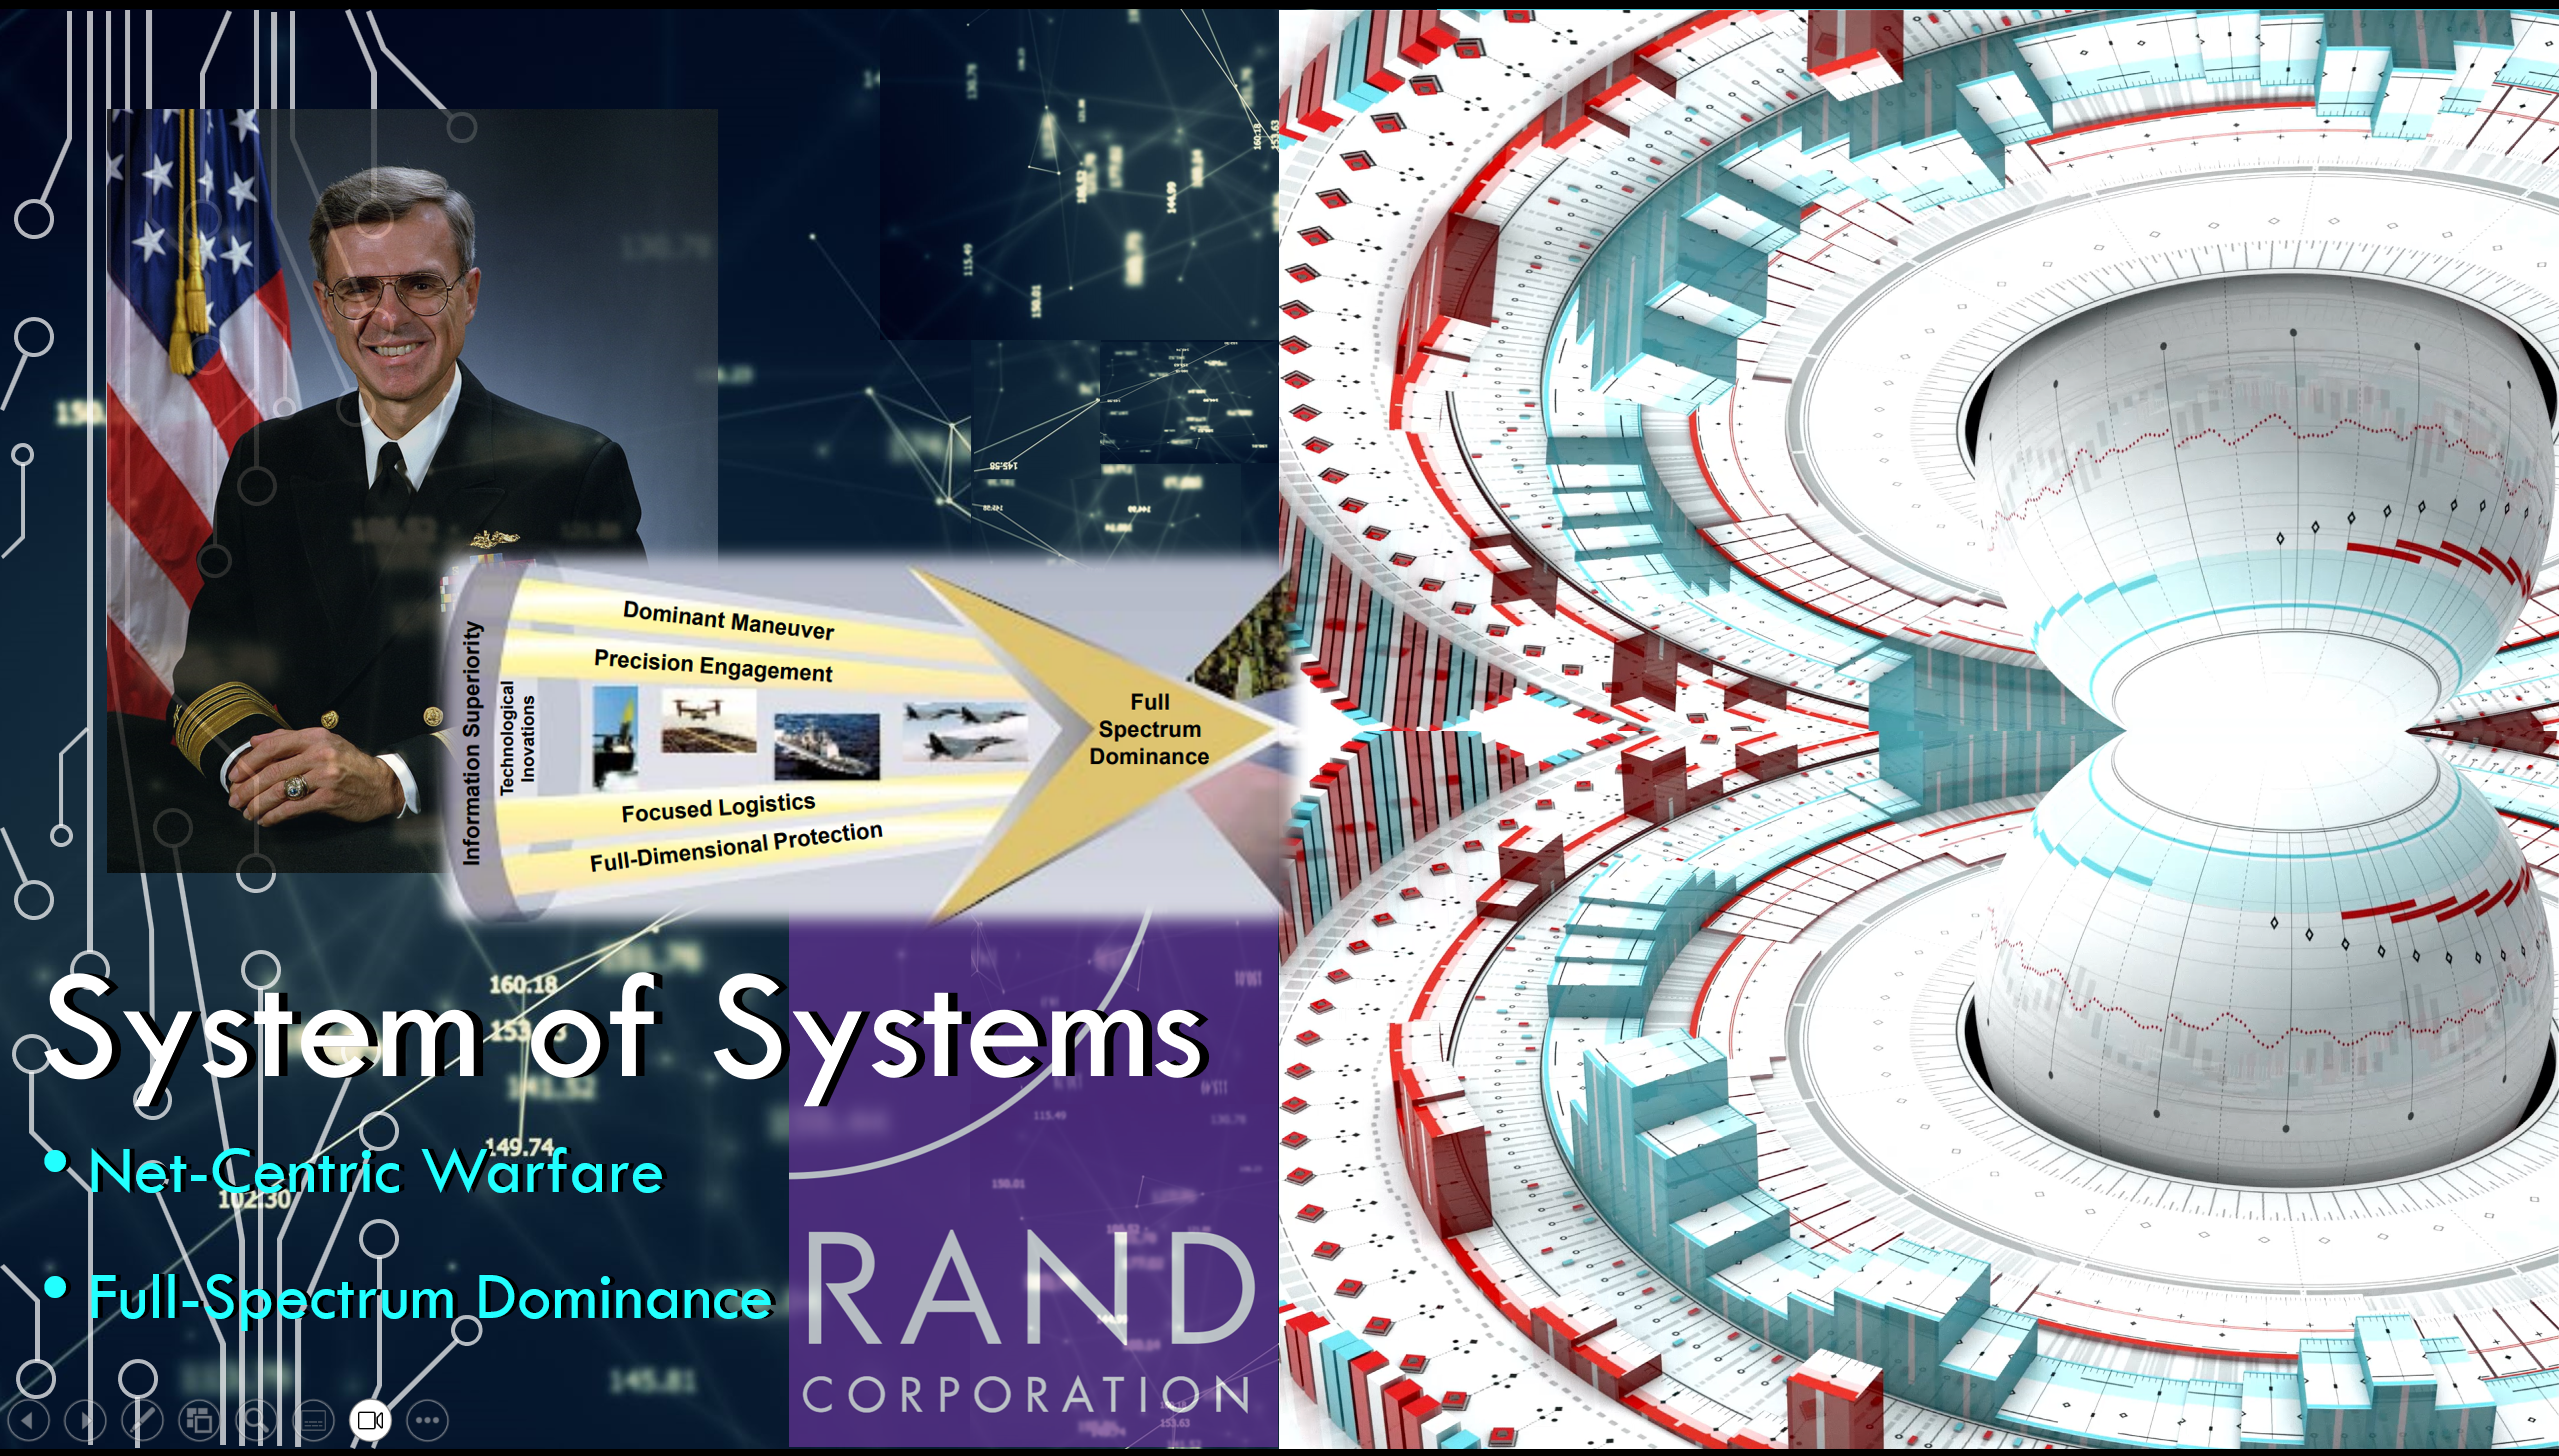 System of Systems slide